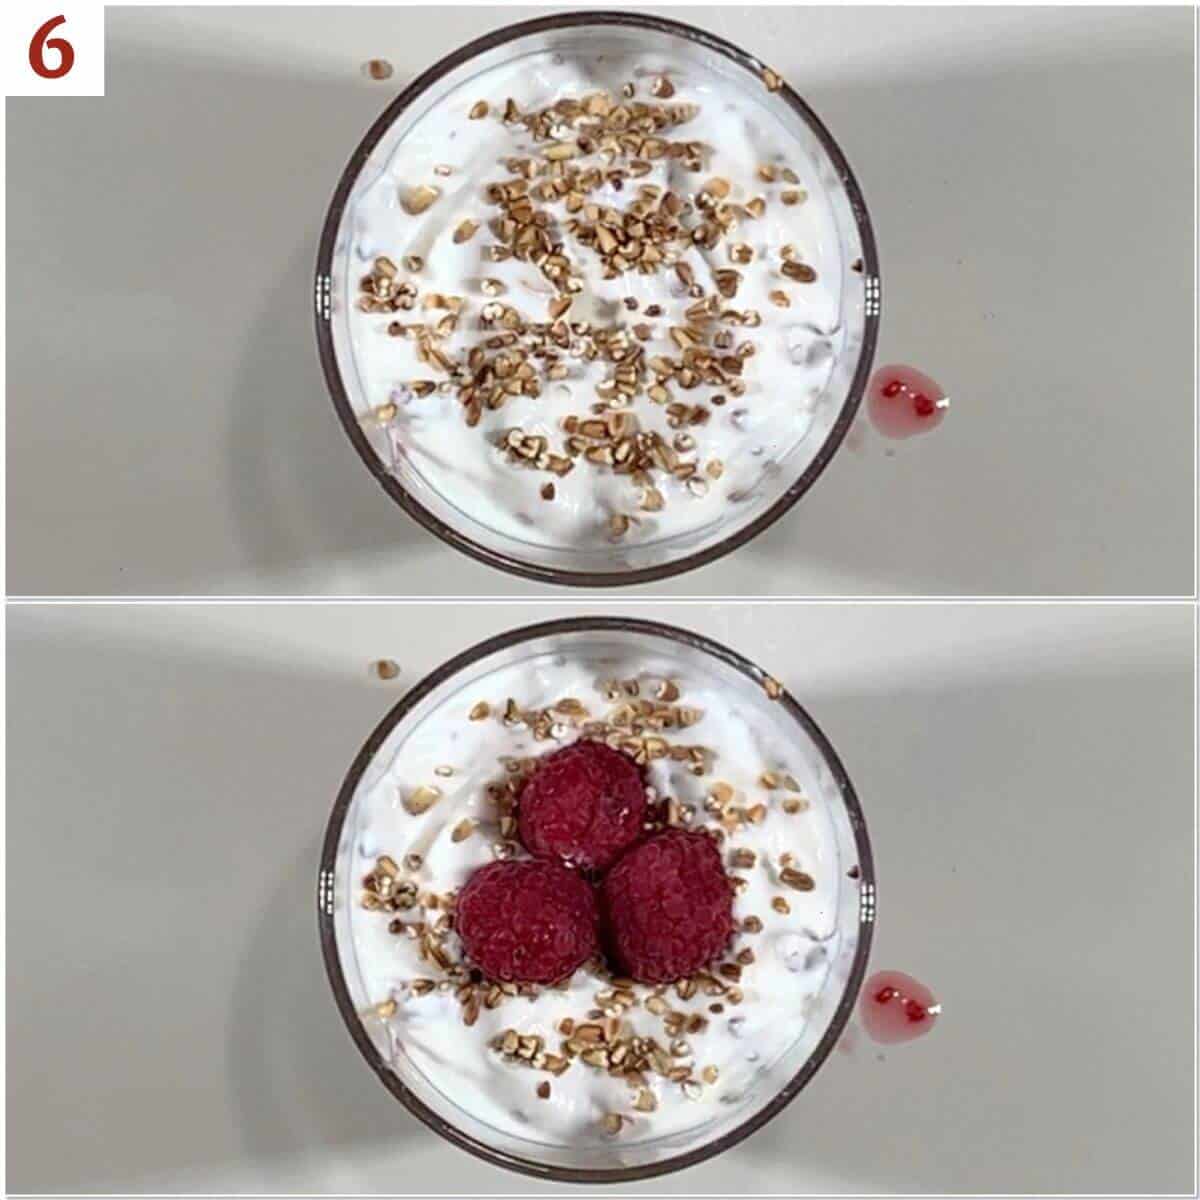 Collage of layering a glass with raspberries, whipped cream mixed with oats, toasted oats, and fresh raspberries.